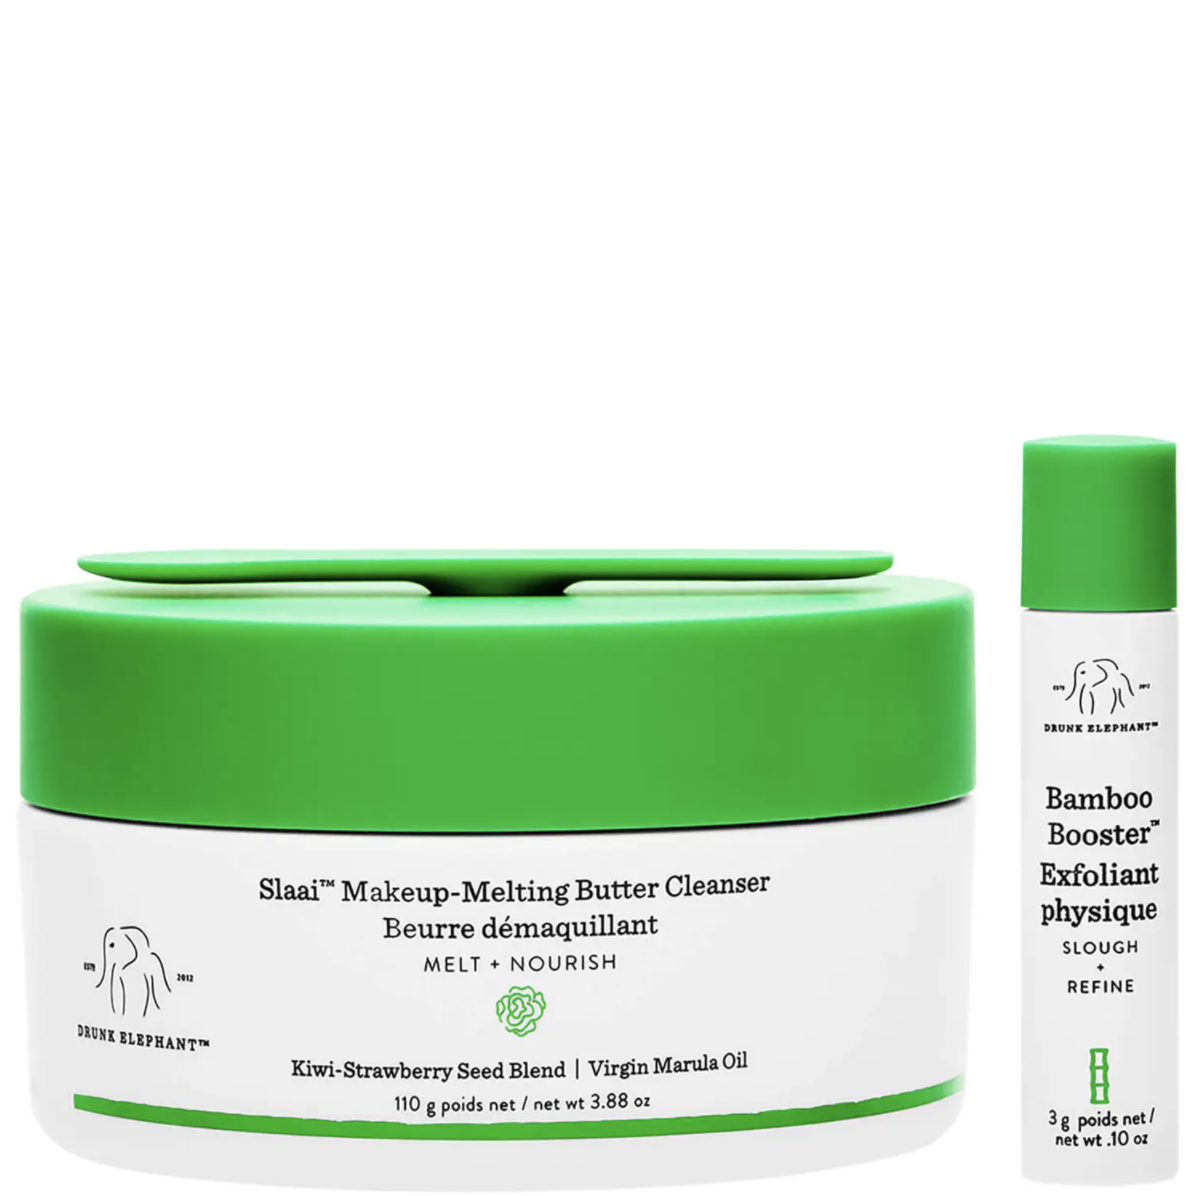 Drunk Elephant Slaai Makeup-Melting Butter Cleanser and Bamboo Booster Exfoliant